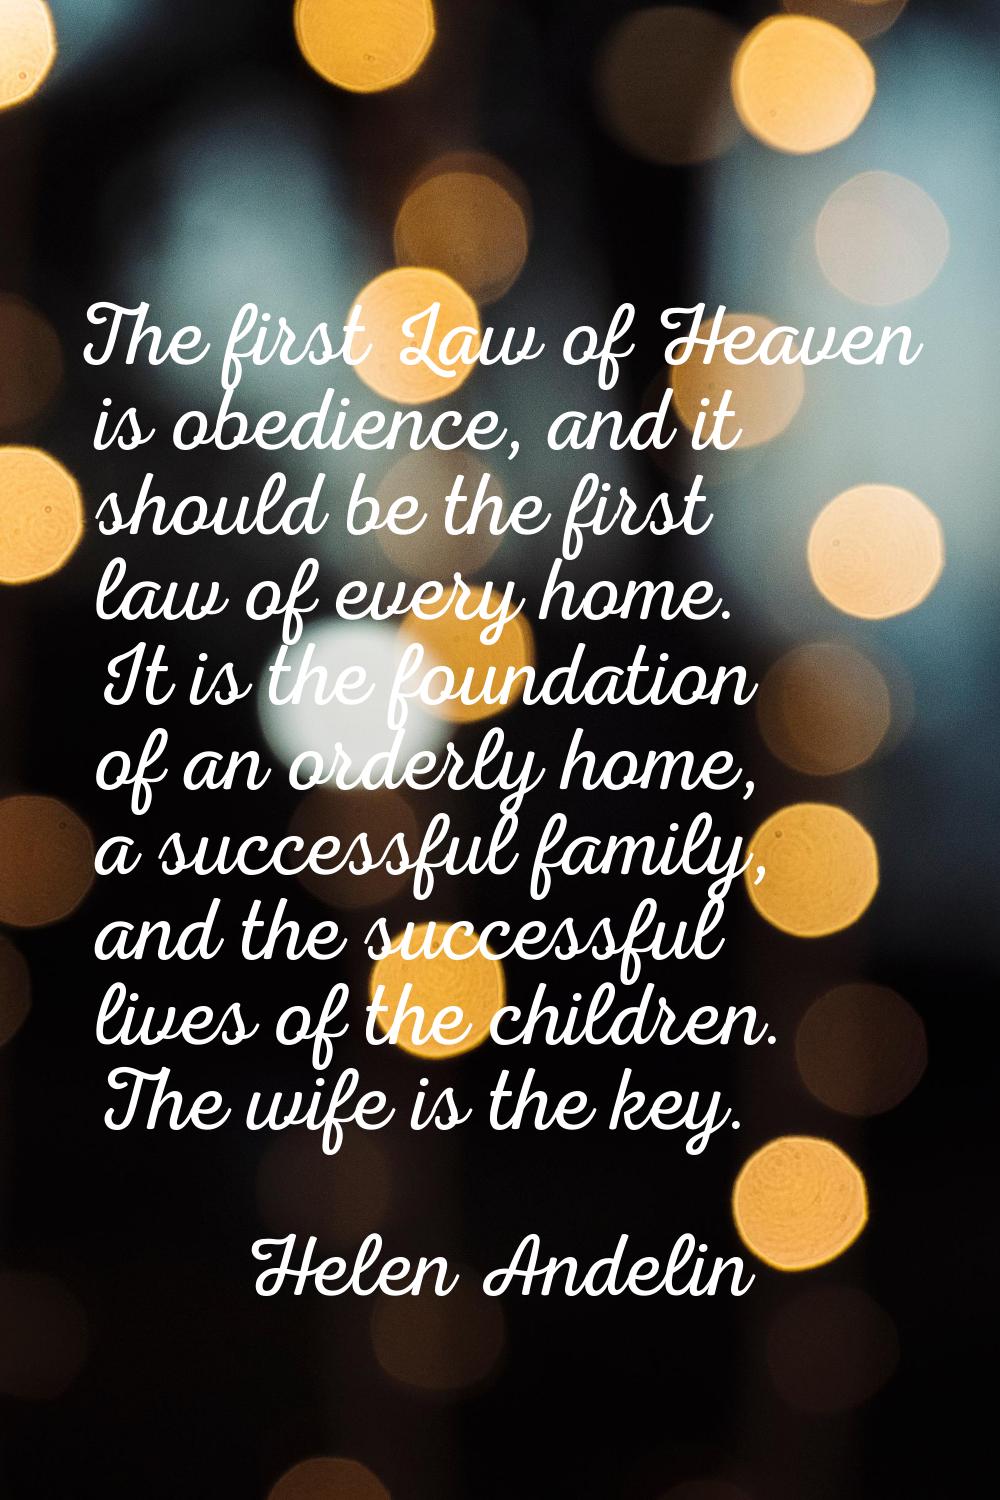 The first Law of Heaven is obedience, and it should be the first law of every home. It is the found